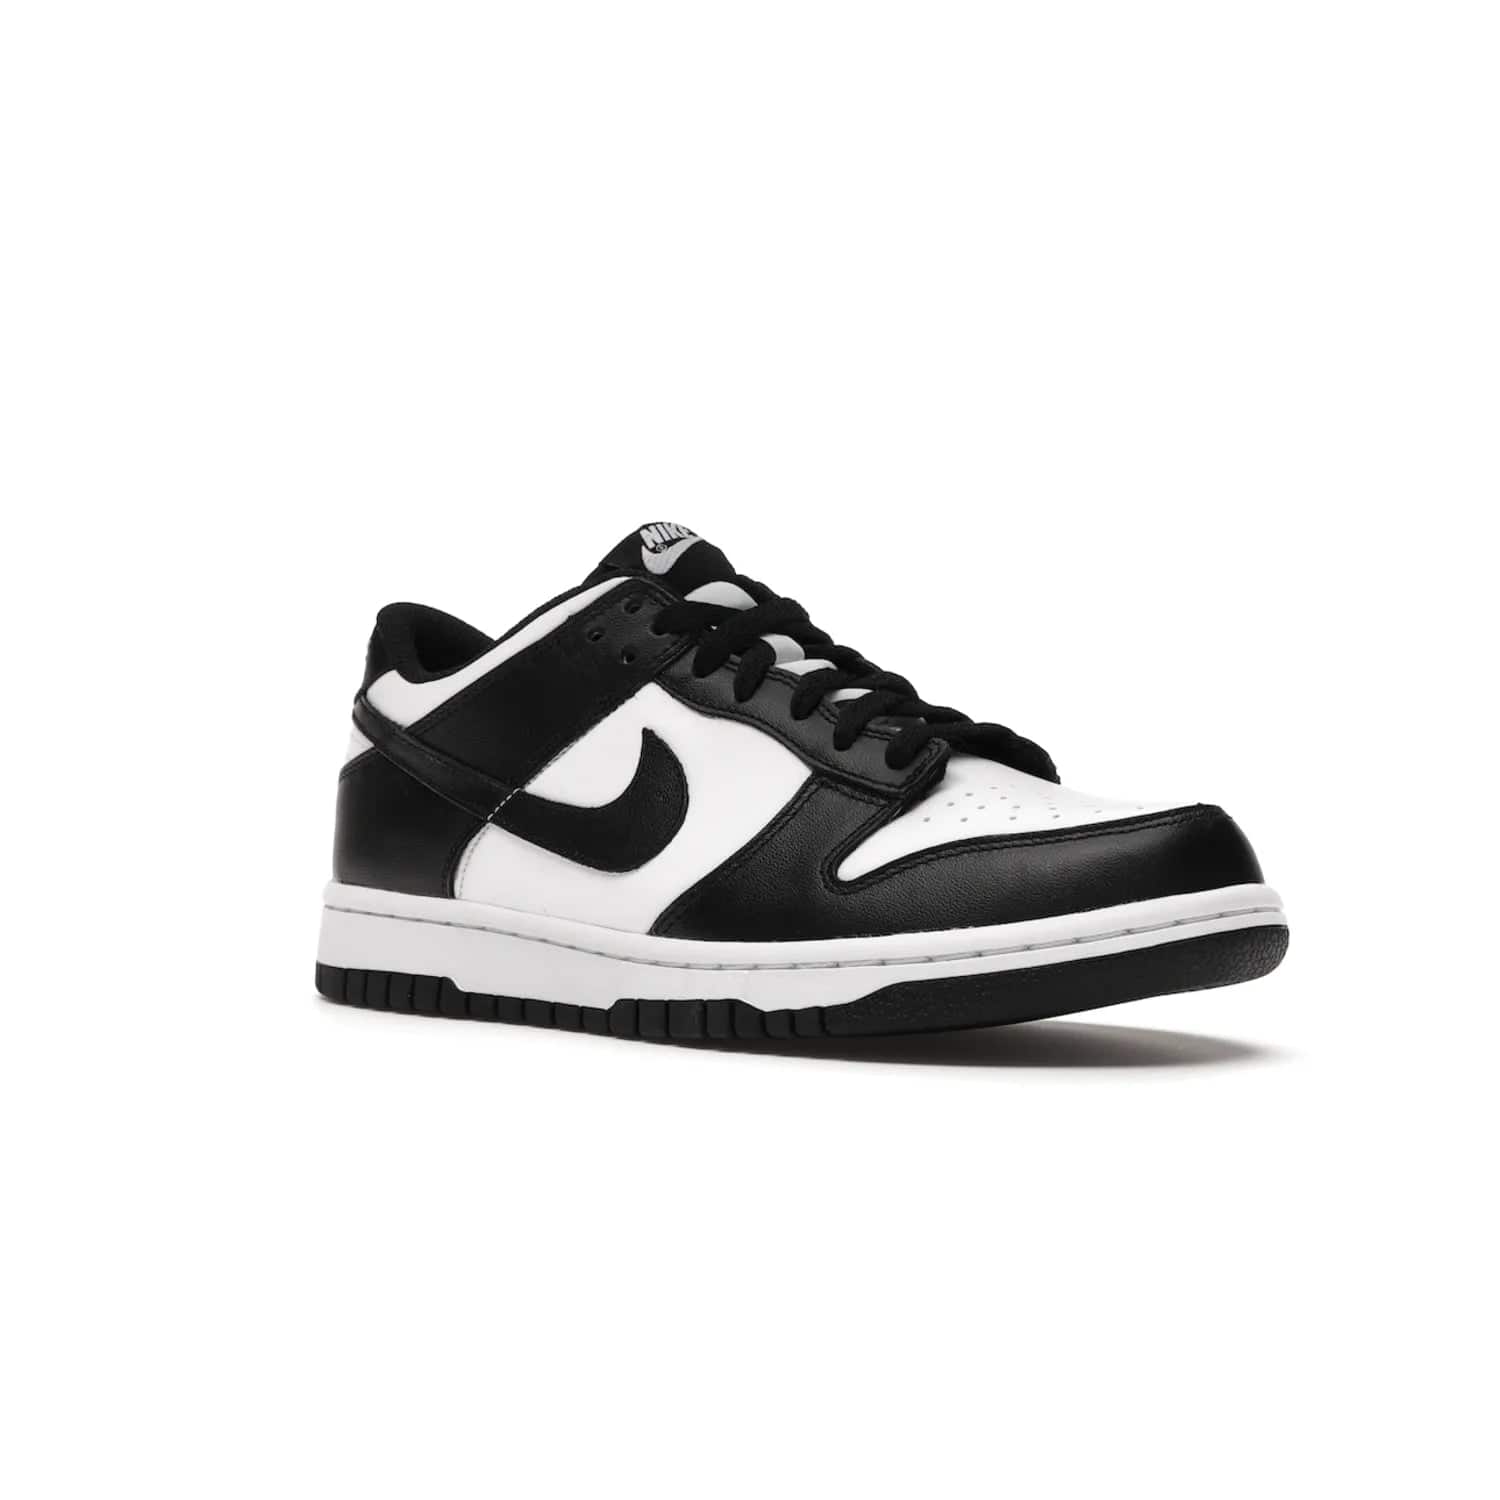 Nike Dunk Low Retro White Black Panda (2021) (GS) - Image 5 - Only at www.BallersClubKickz.com - Upgrade your style with the Nike Dunk Low Retro White Black (GS). Featuring premium leather, iconic Nike text, signature Swoosh logo and striking black/white colorway, this striking silhouette is the perfect mix of style and comfort. Colorway released in March 2021.